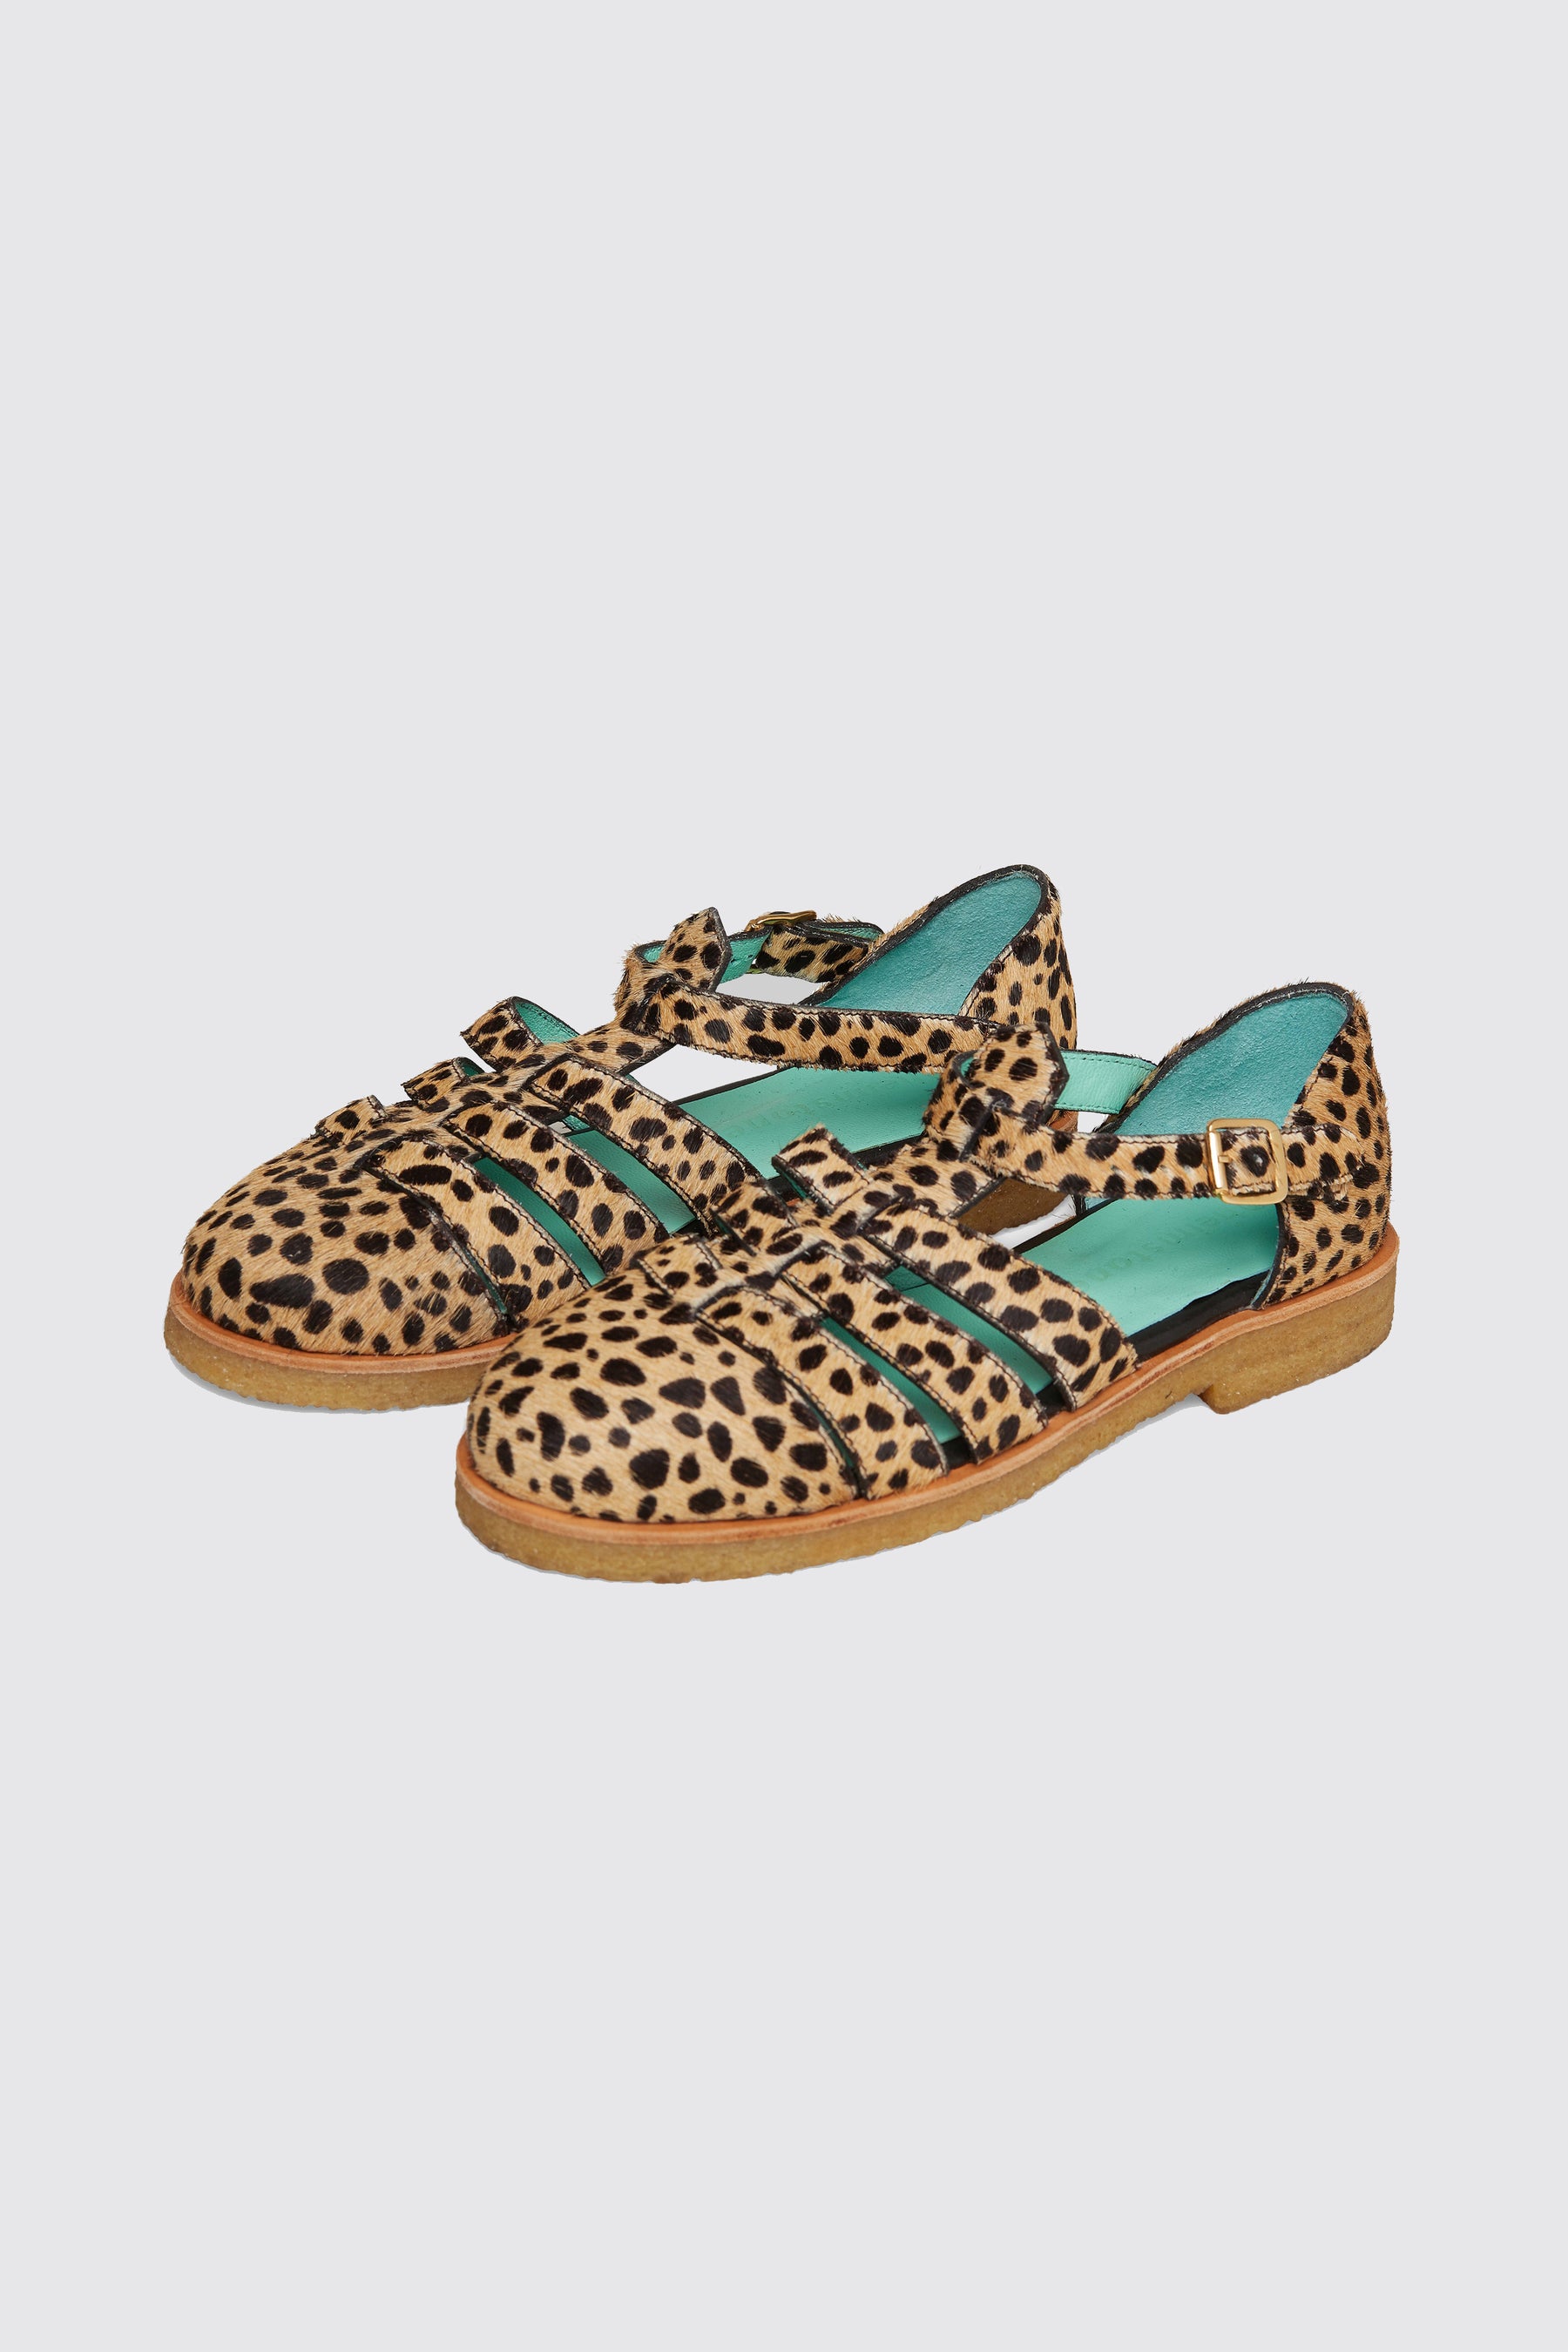 Ricky sandals in Cheetah printed leather